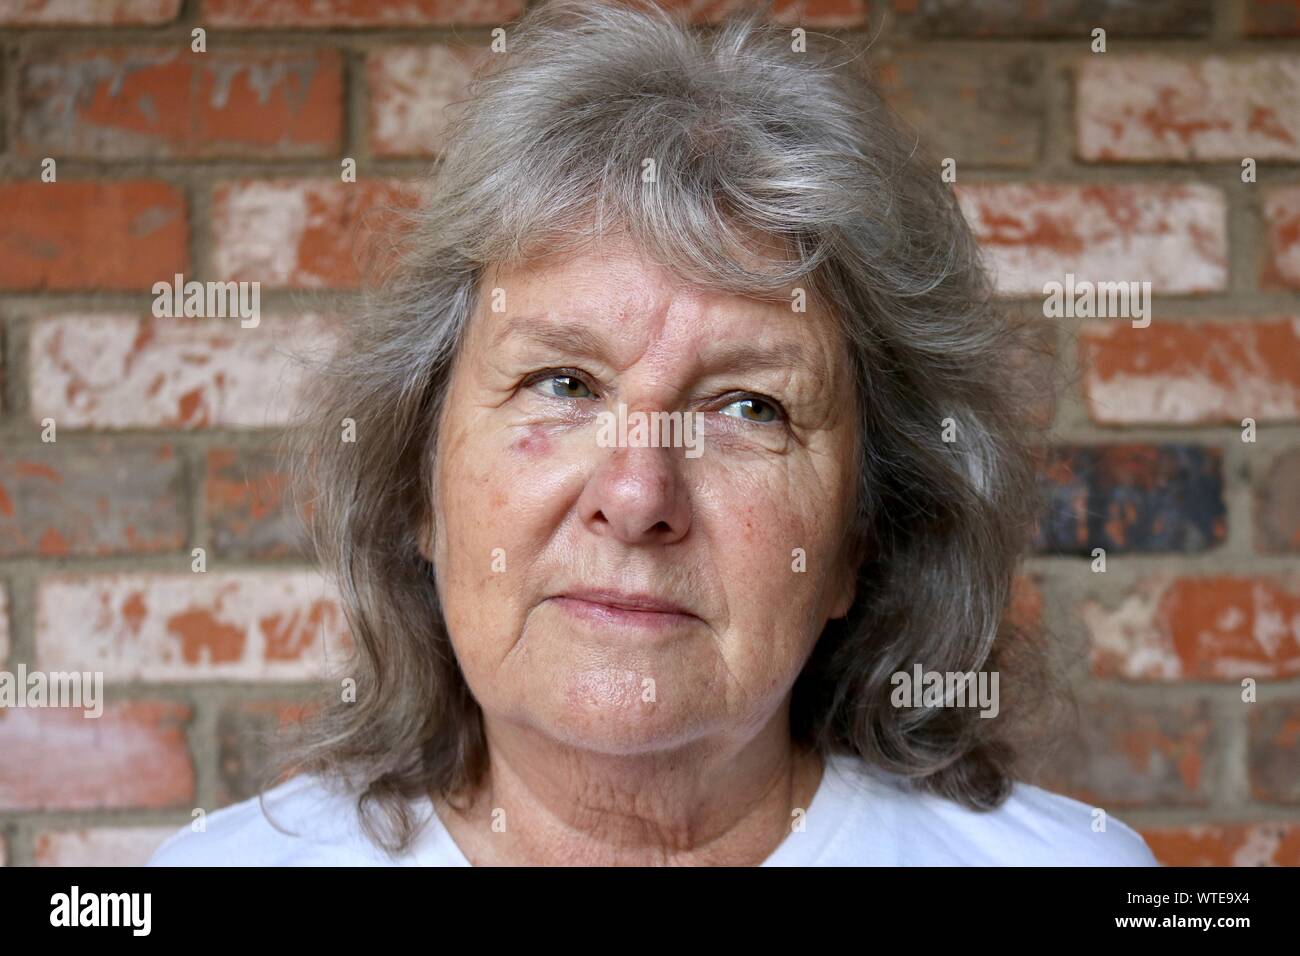 Portrait of a grey haired woman looking away with doubt in her eyes Stock Photo